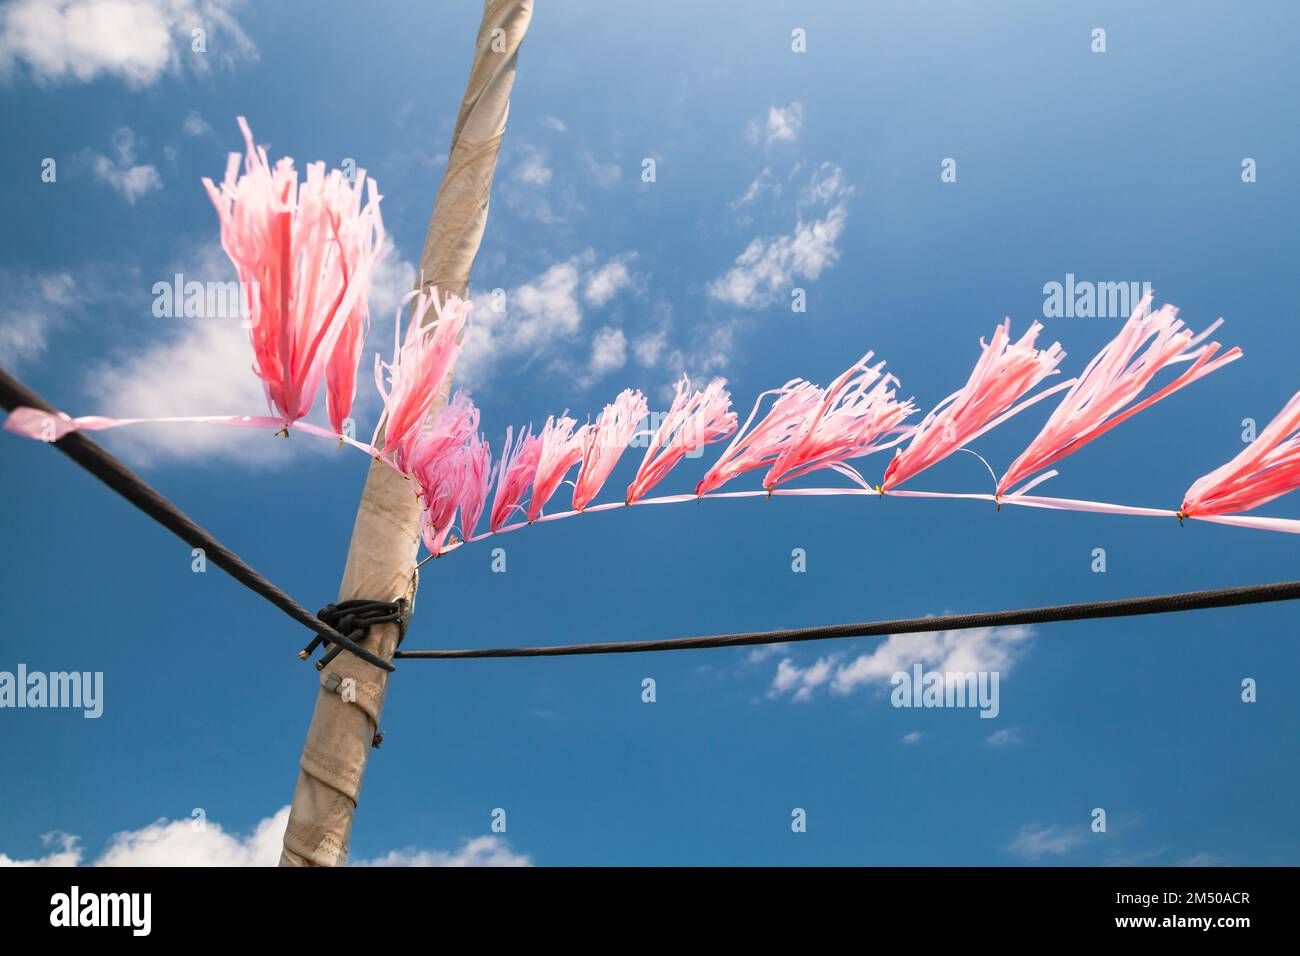 Pink decoration hangs on a yacht  mast under blue sky on a sunny day Stock Photo